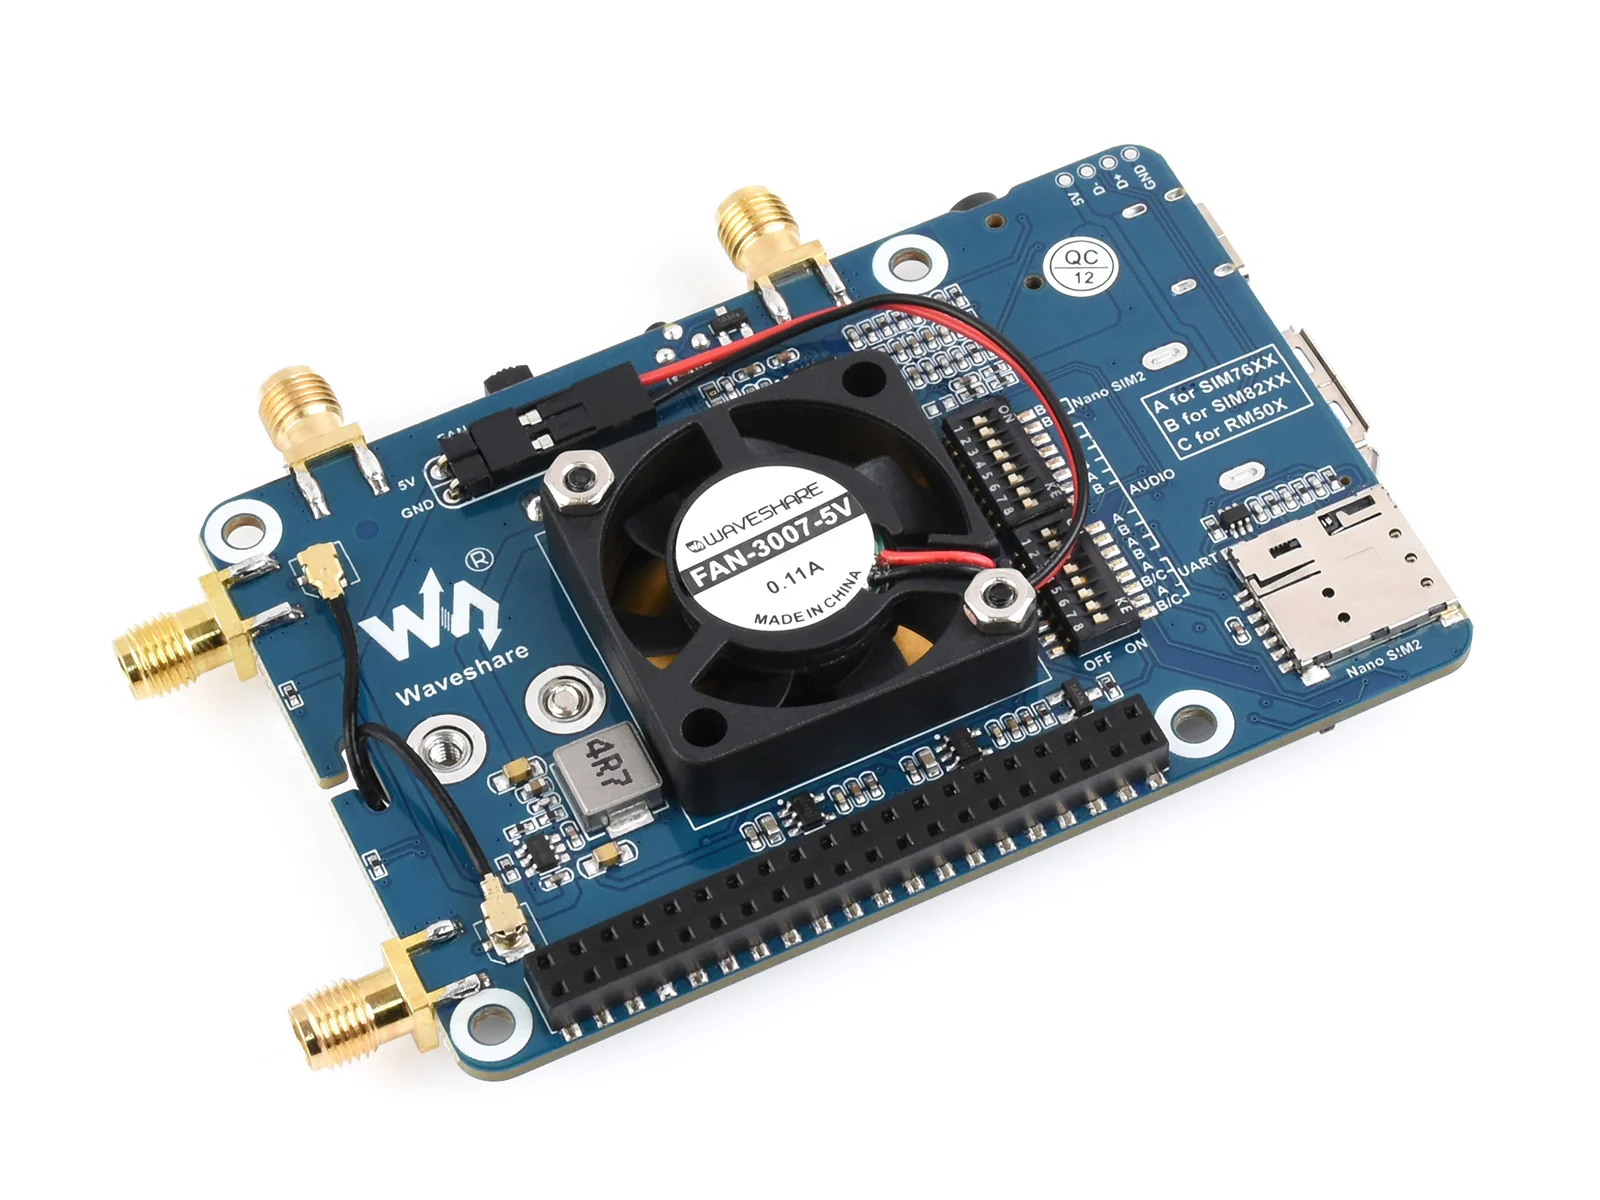 Waveshare Raspberry Pi LTE Cat 6 Communication HAT, LTE-A Global Multi-band, GNSS Positioning, Comes With EM060K-GL Module